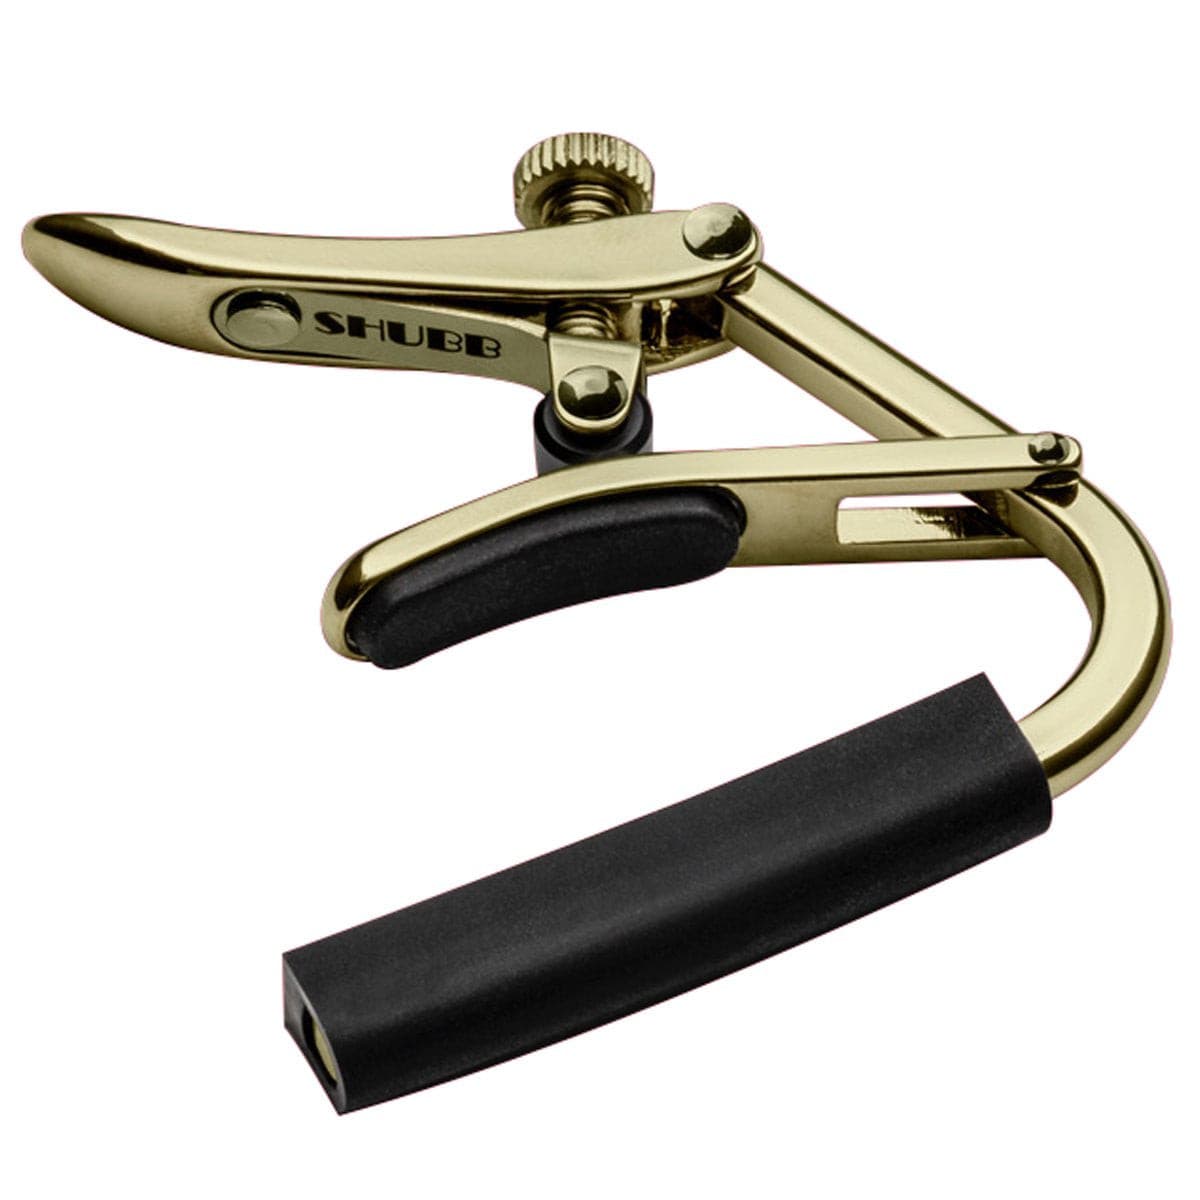 Shubb 'Capo Royale' 12 String Guitar Capo - Gold, Accessory for sale at Richards Guitars.